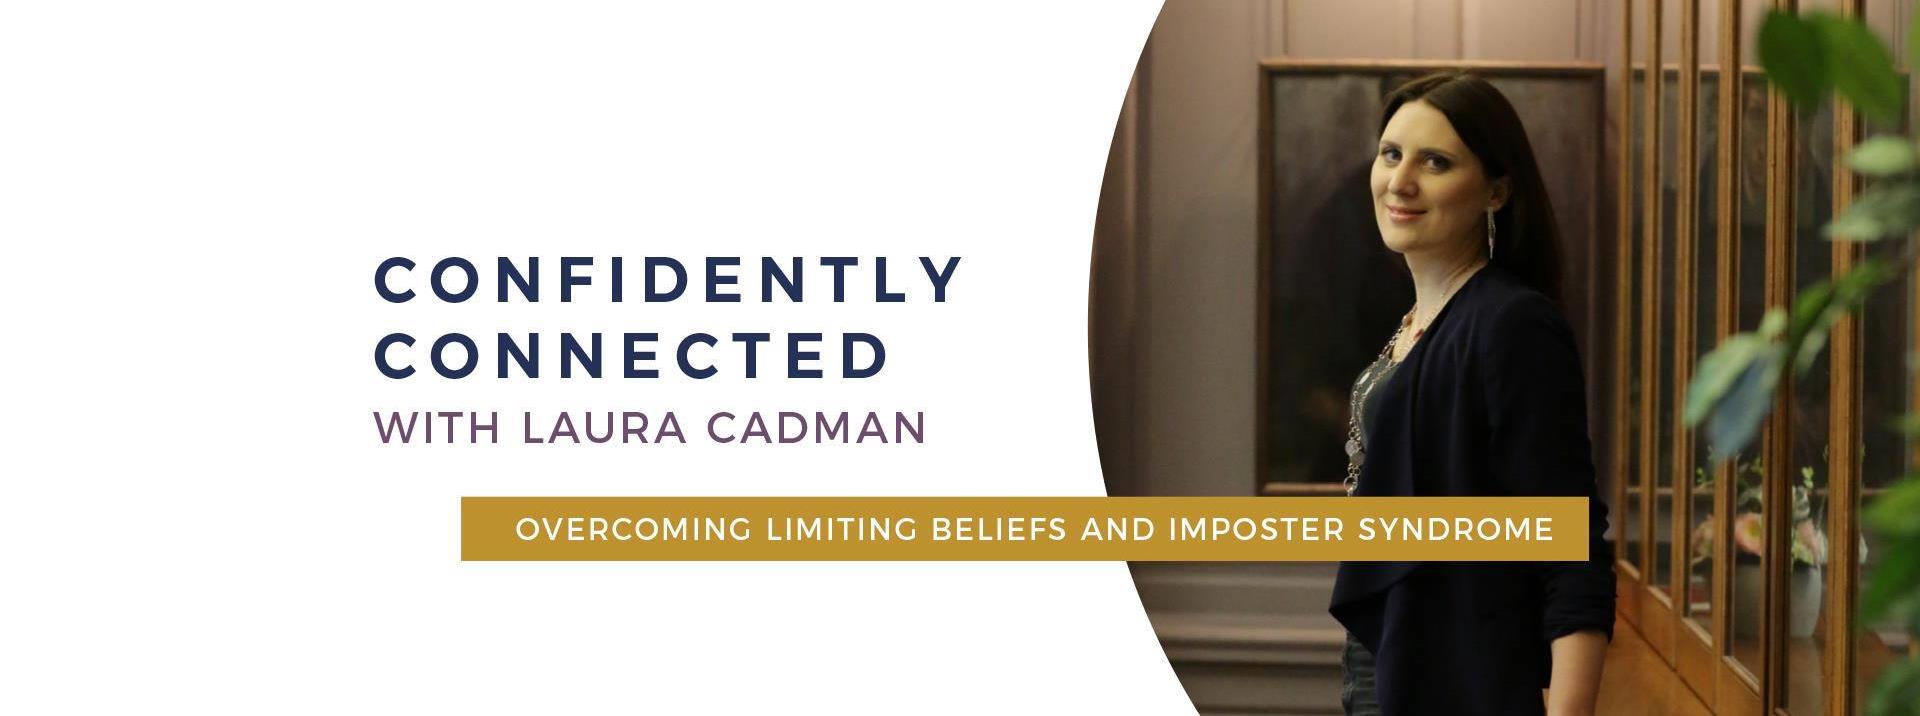 Laura Cadman - Confidently Connected